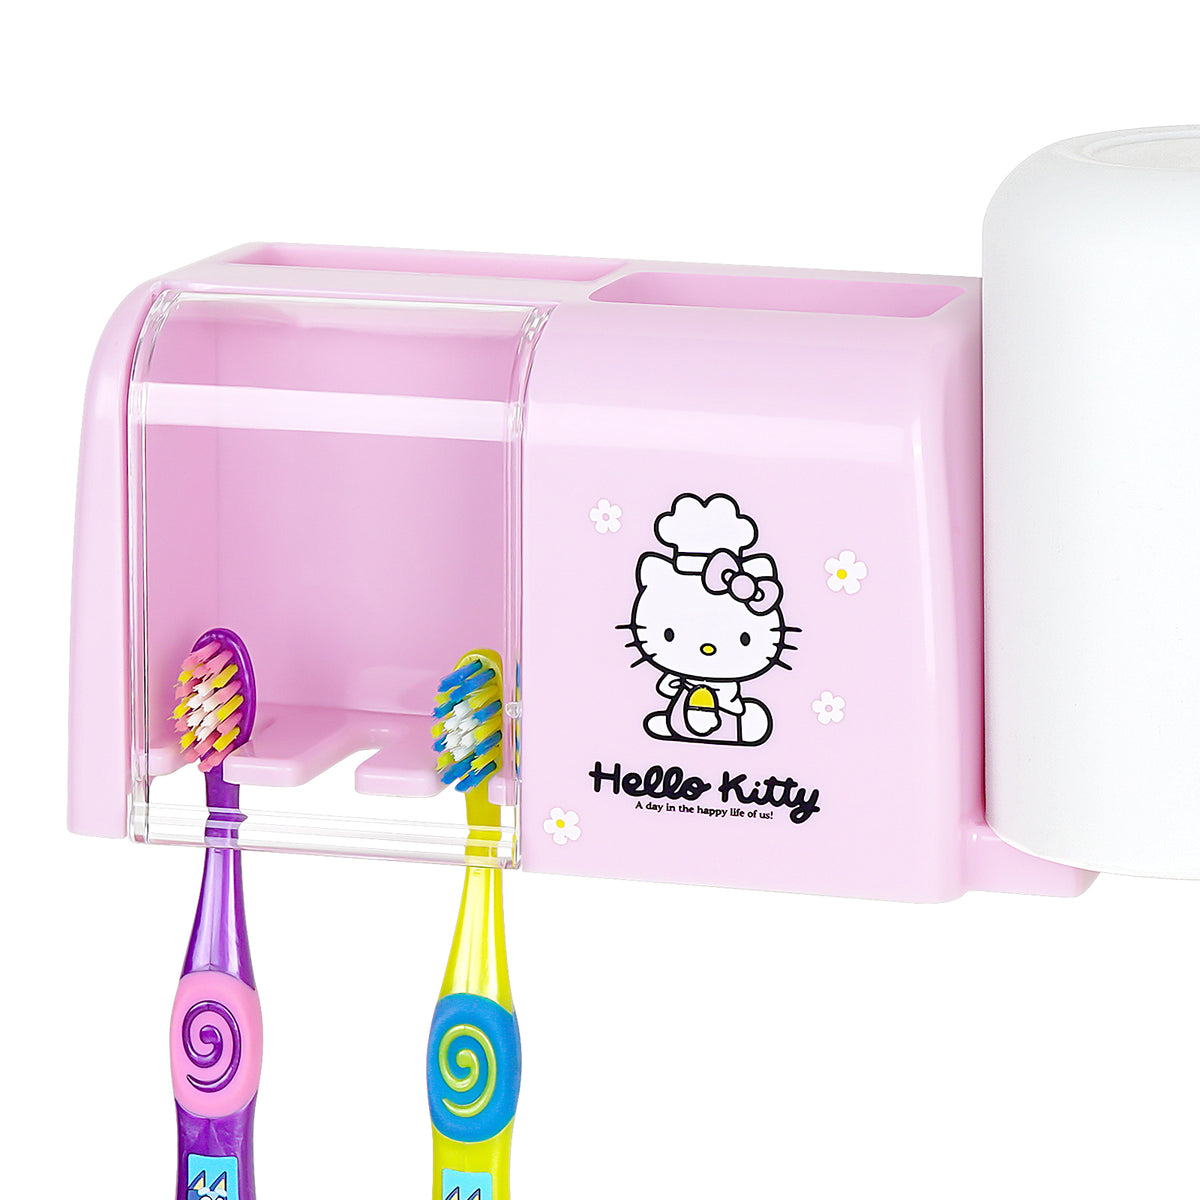 Adorila Wall Mounted Kids Toothbrush Holder with Cover, 3 Slots Hello Kitty Toothbrush Storage Organizer, Self Adhesive Toothbrush Toothpaste Hanger for Bathroom (Pink)